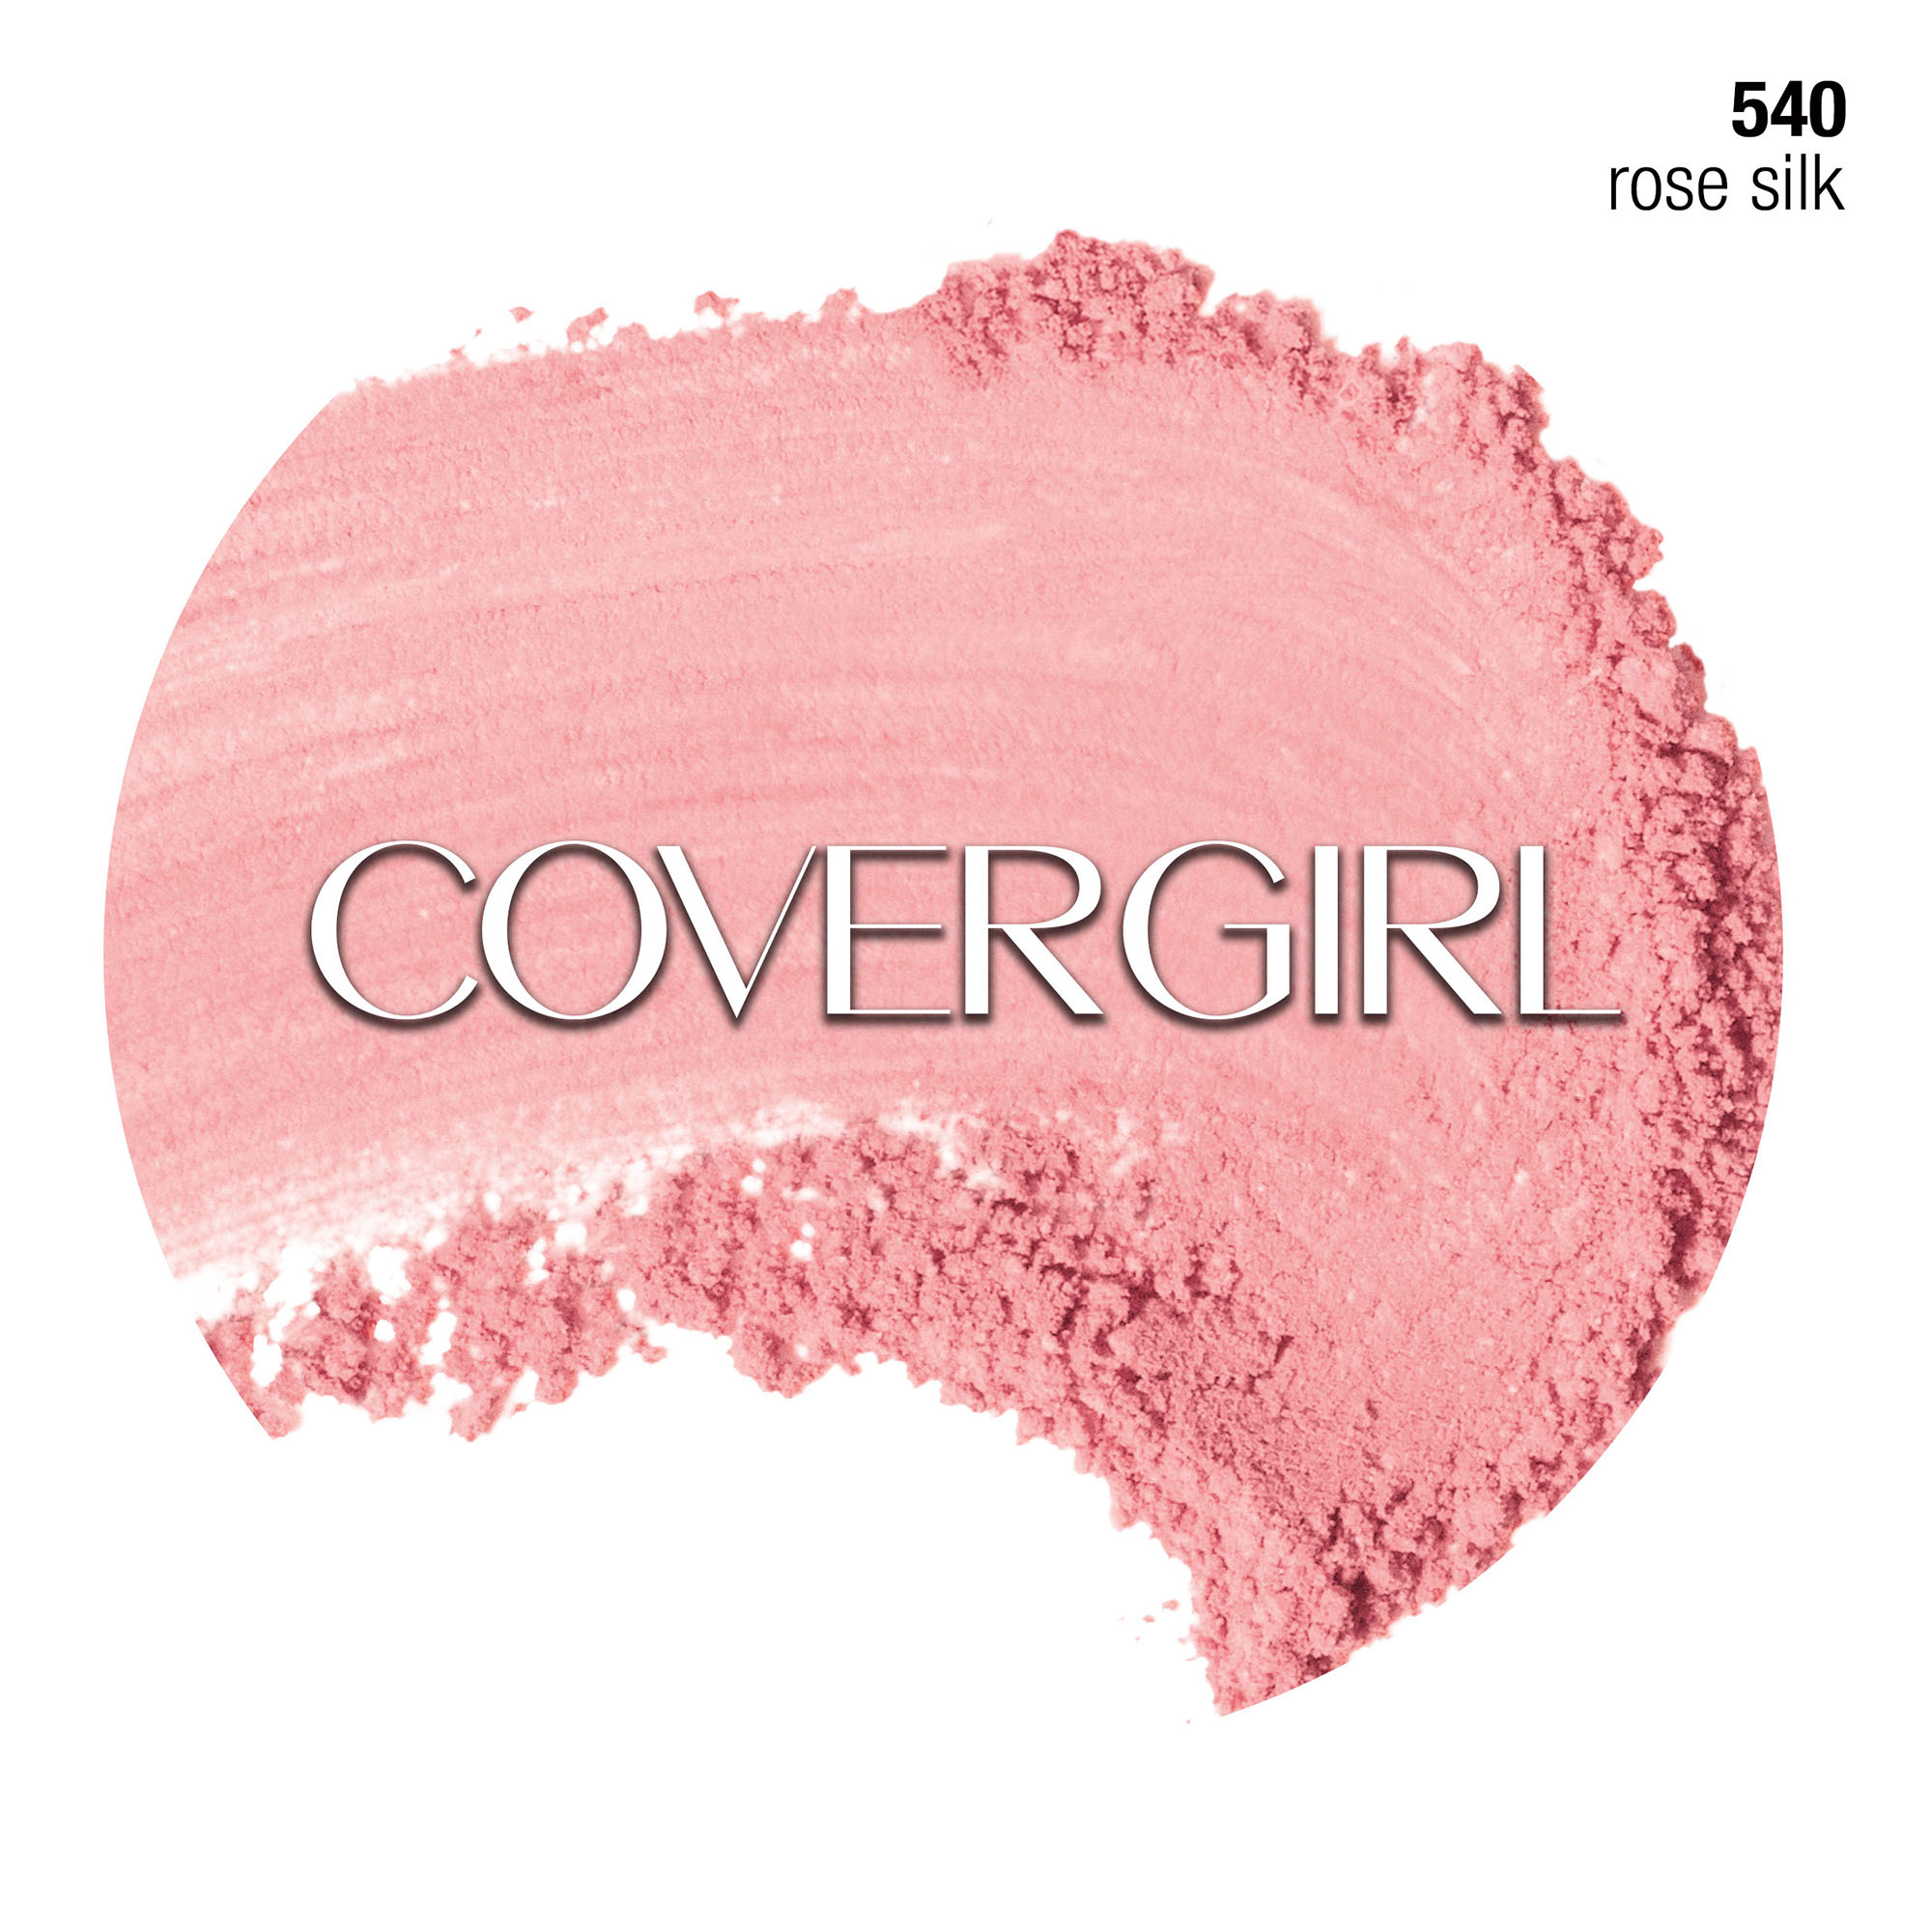 COVERGIRL Classic Color Powder Blush, 540 Rose Silk, 0.3 oz, Long Lasting Glowing Color - image 2 of 5